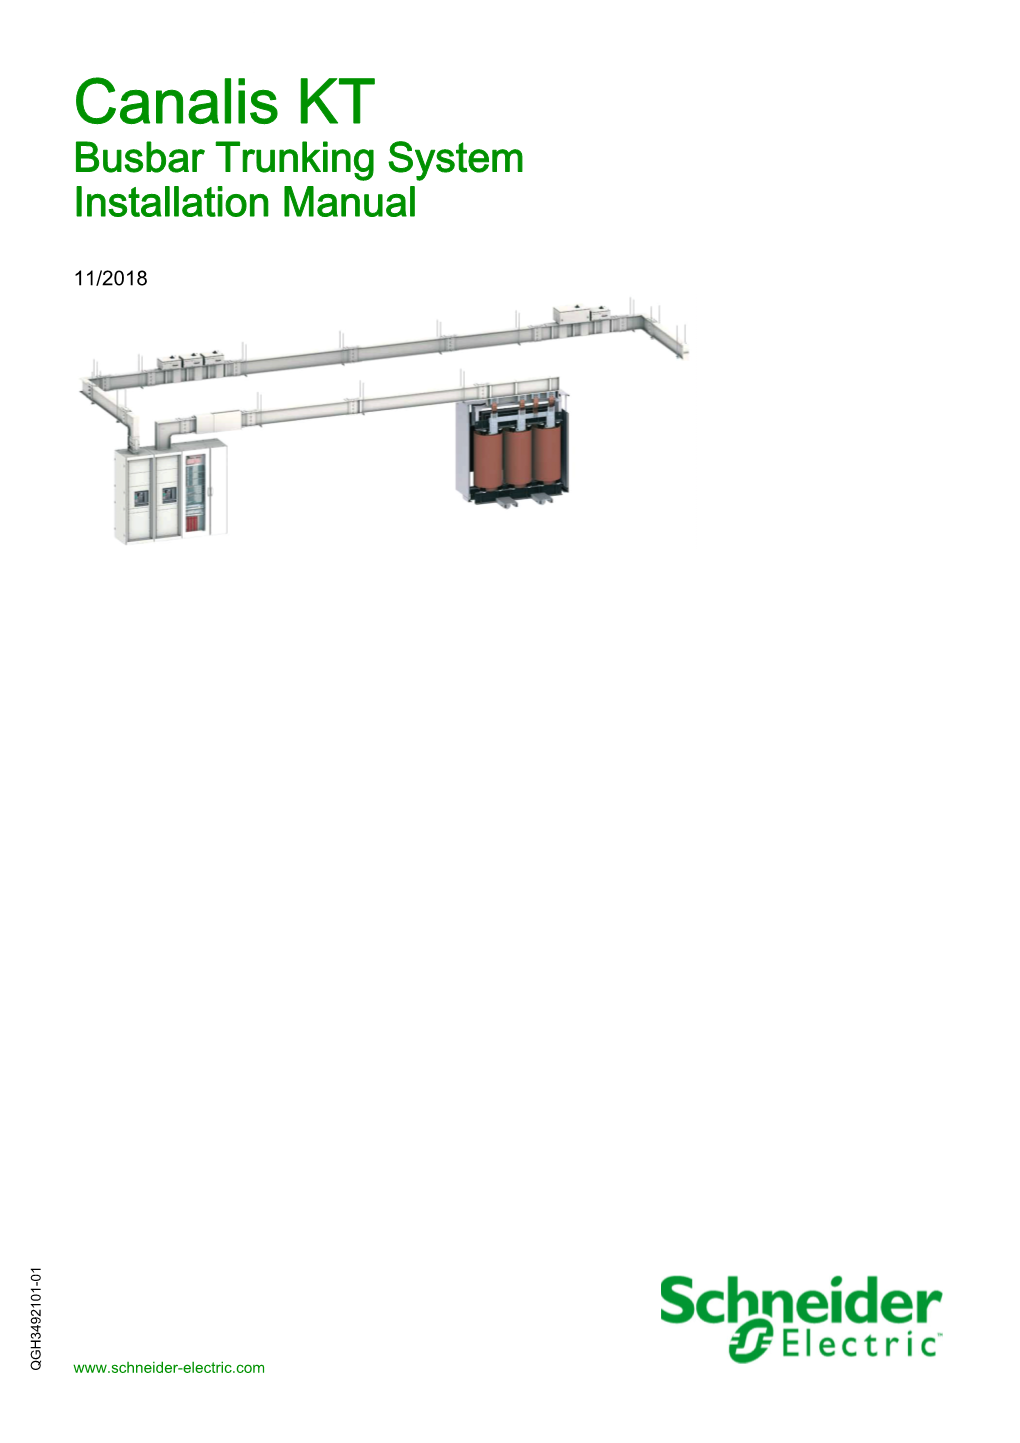 Canalis KT Busbar Trunking System